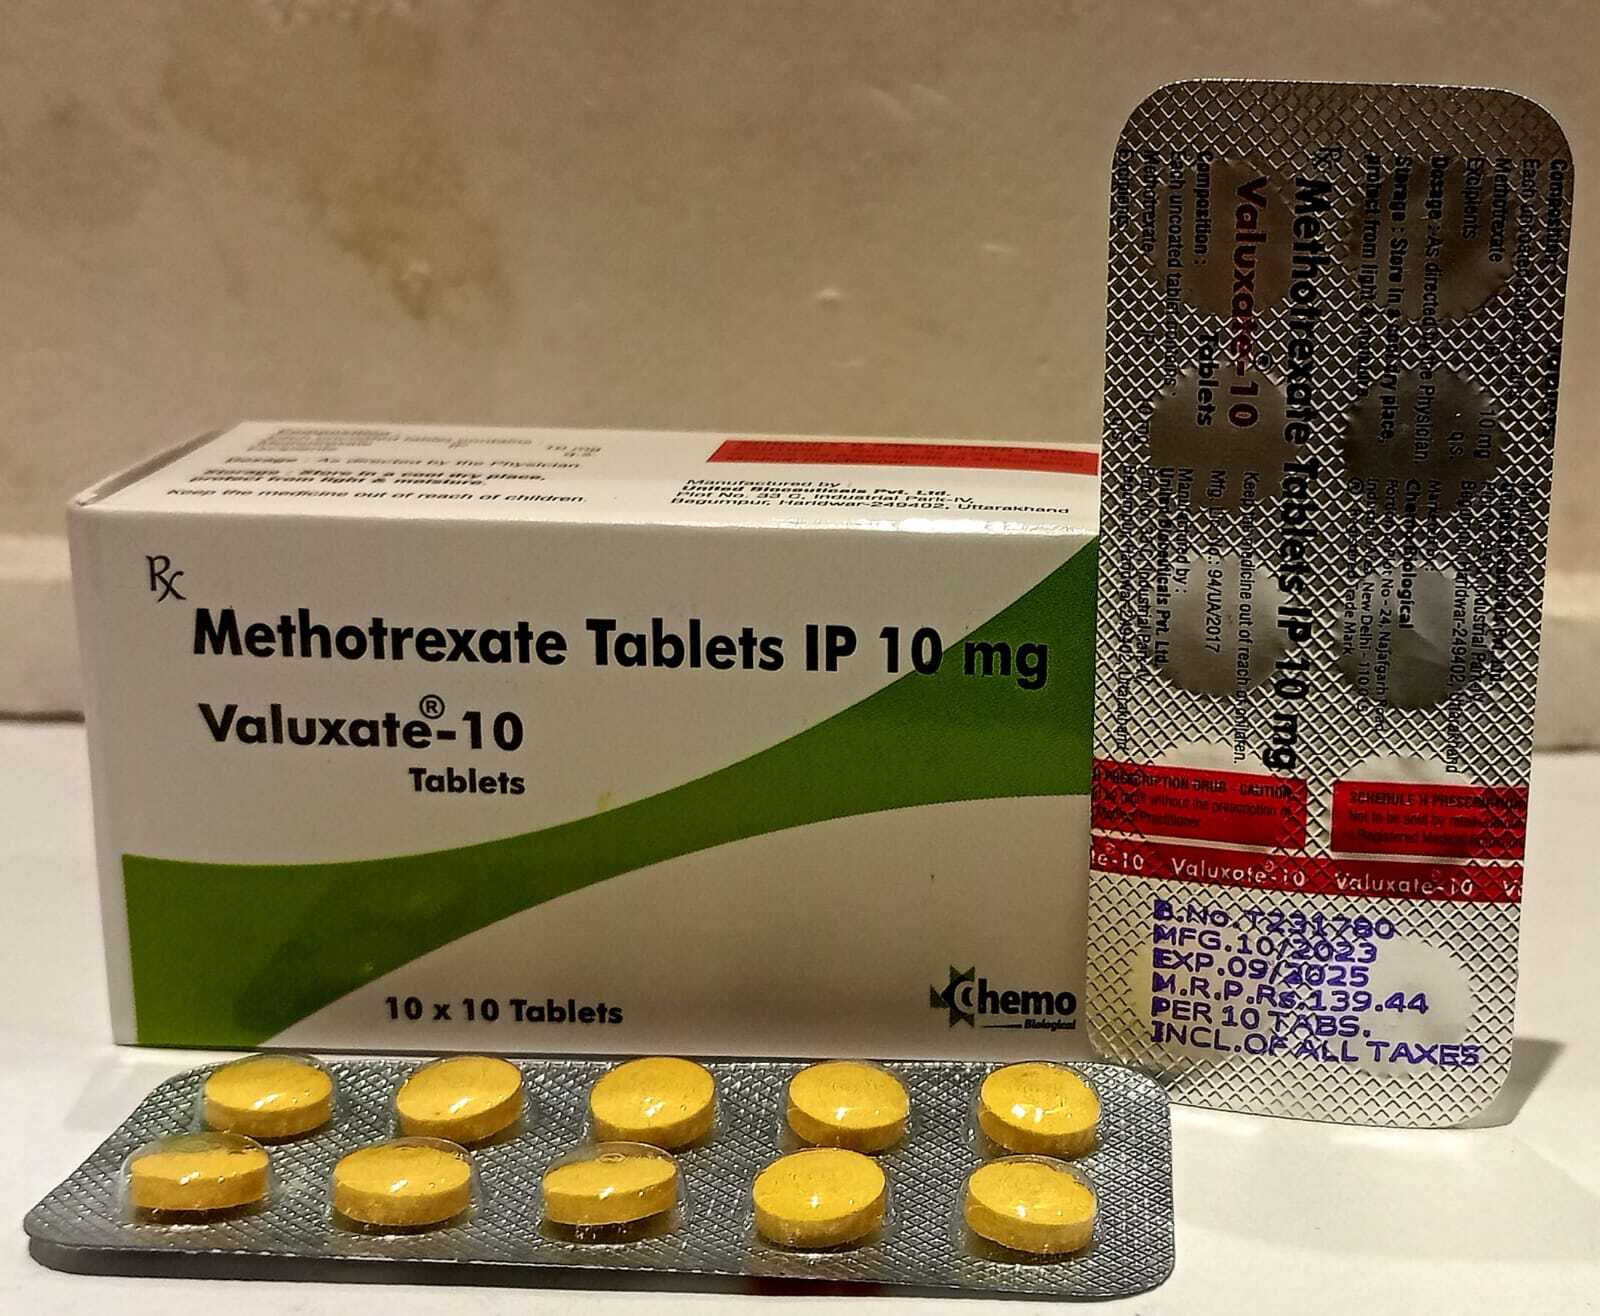 Methotrexate Tablets IP 10 mg